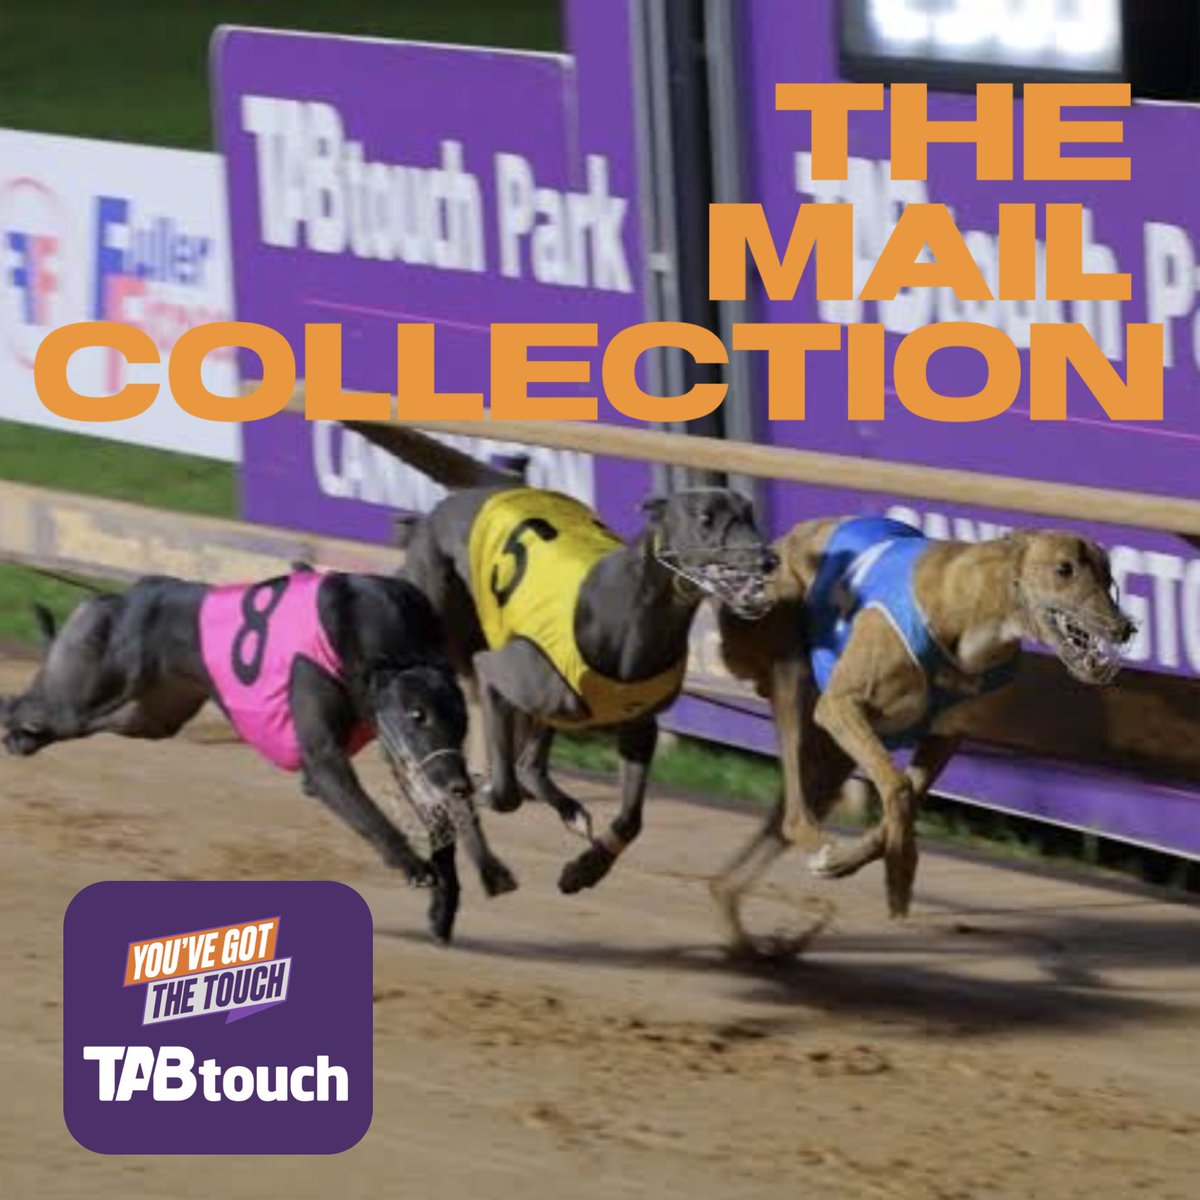 The Mail Collection is back Sprinters Plate final, Wenty feature heats The Meadows The Gardens and all the usual segments Thanks to @TAB_touch @Shortte @ethansgreys #thedoublerove on.soundcloud.com/V7jKR57qGaWidv… open.spotify.com/episode/1FA1D4…